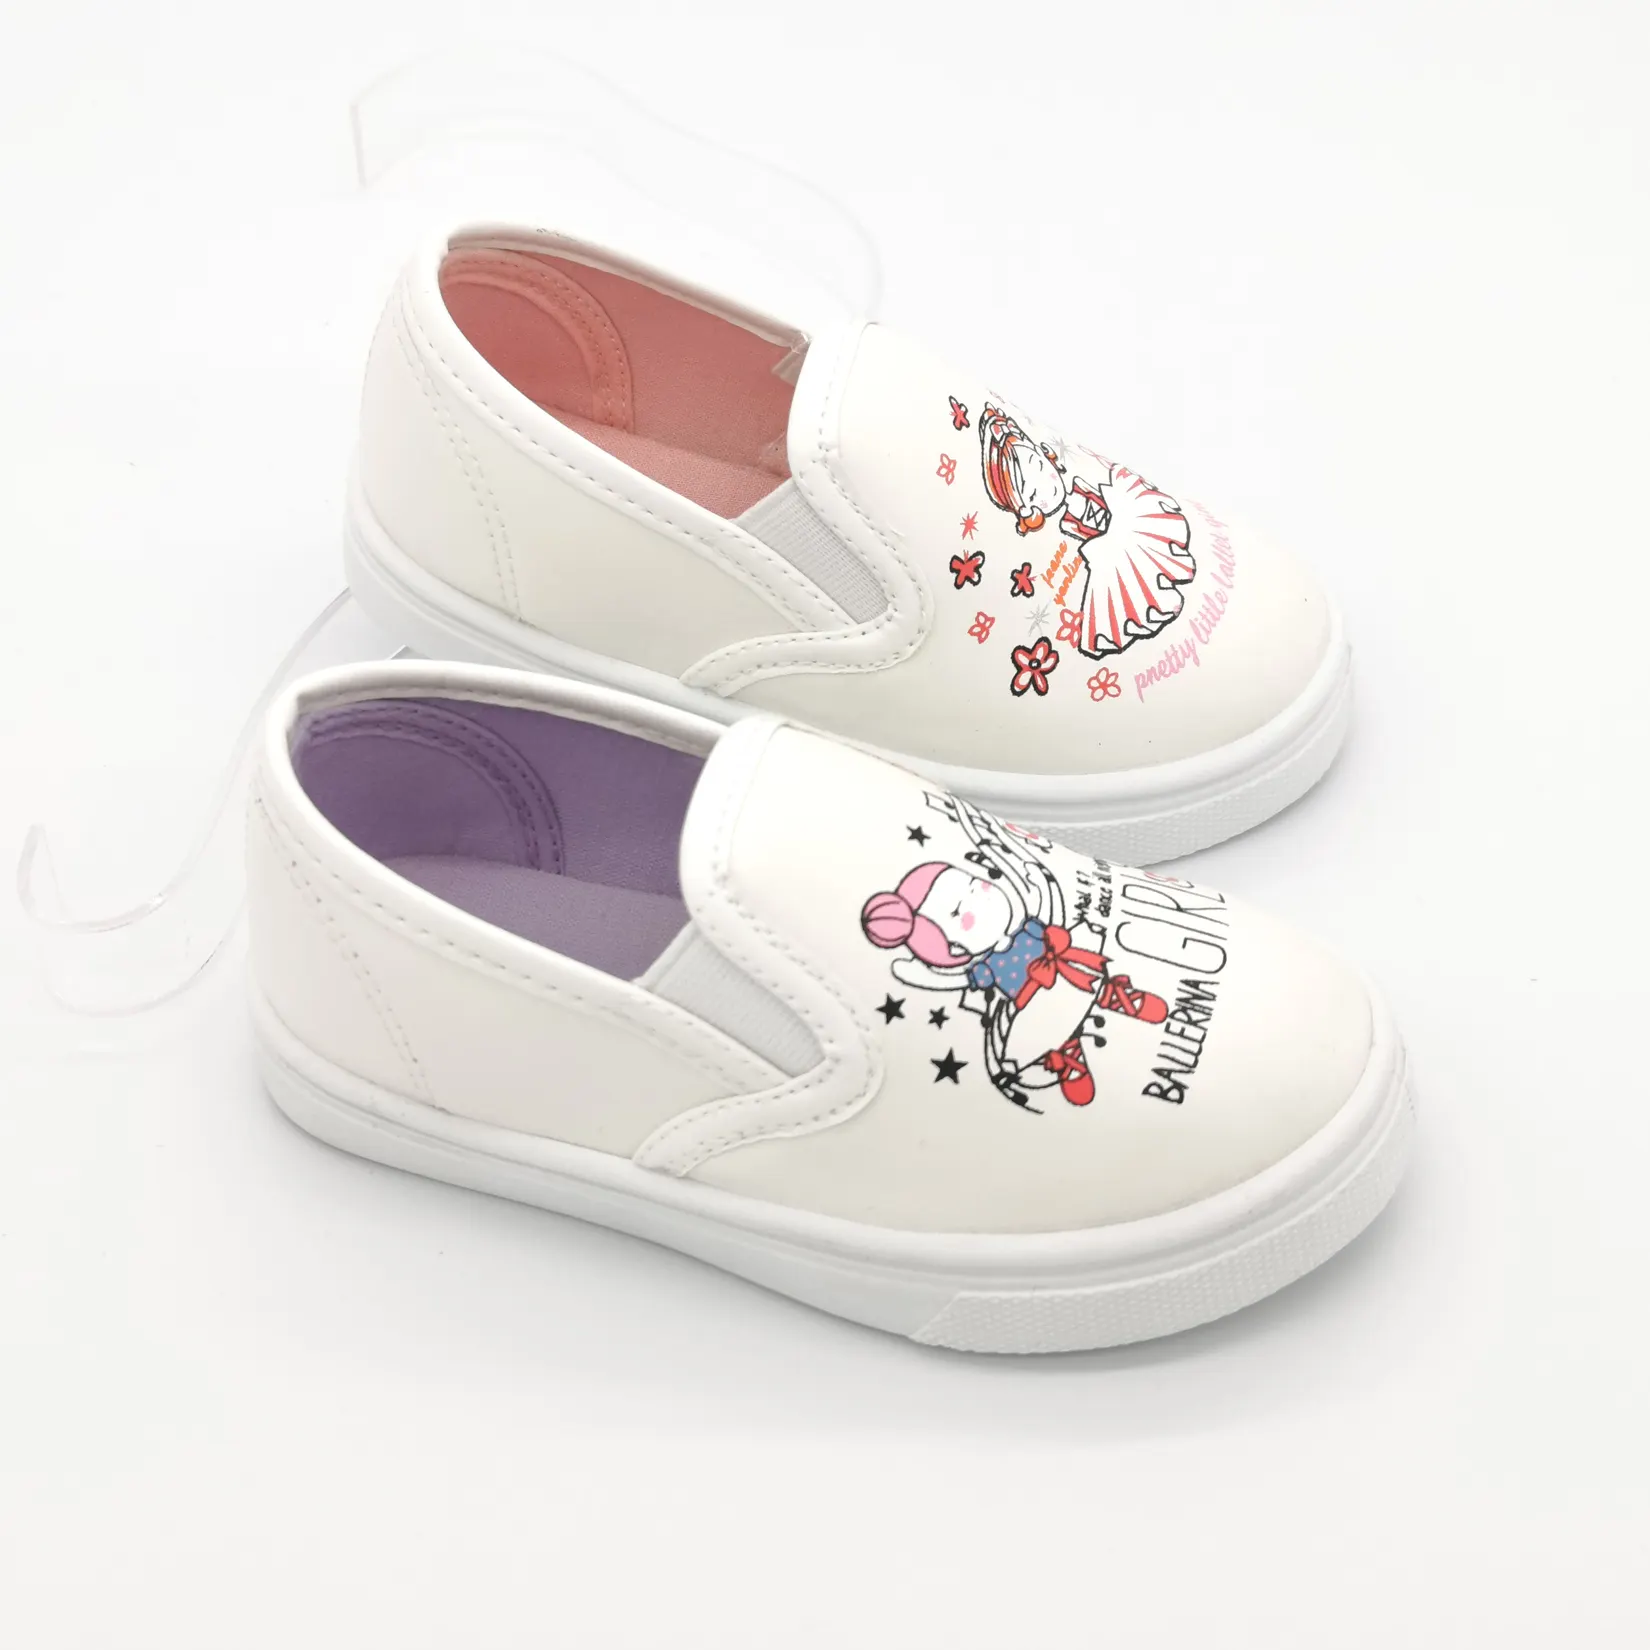 Fashion Comfort customized kids shoes stylish lovely leather printed girls shoes Classic Style shoes for children